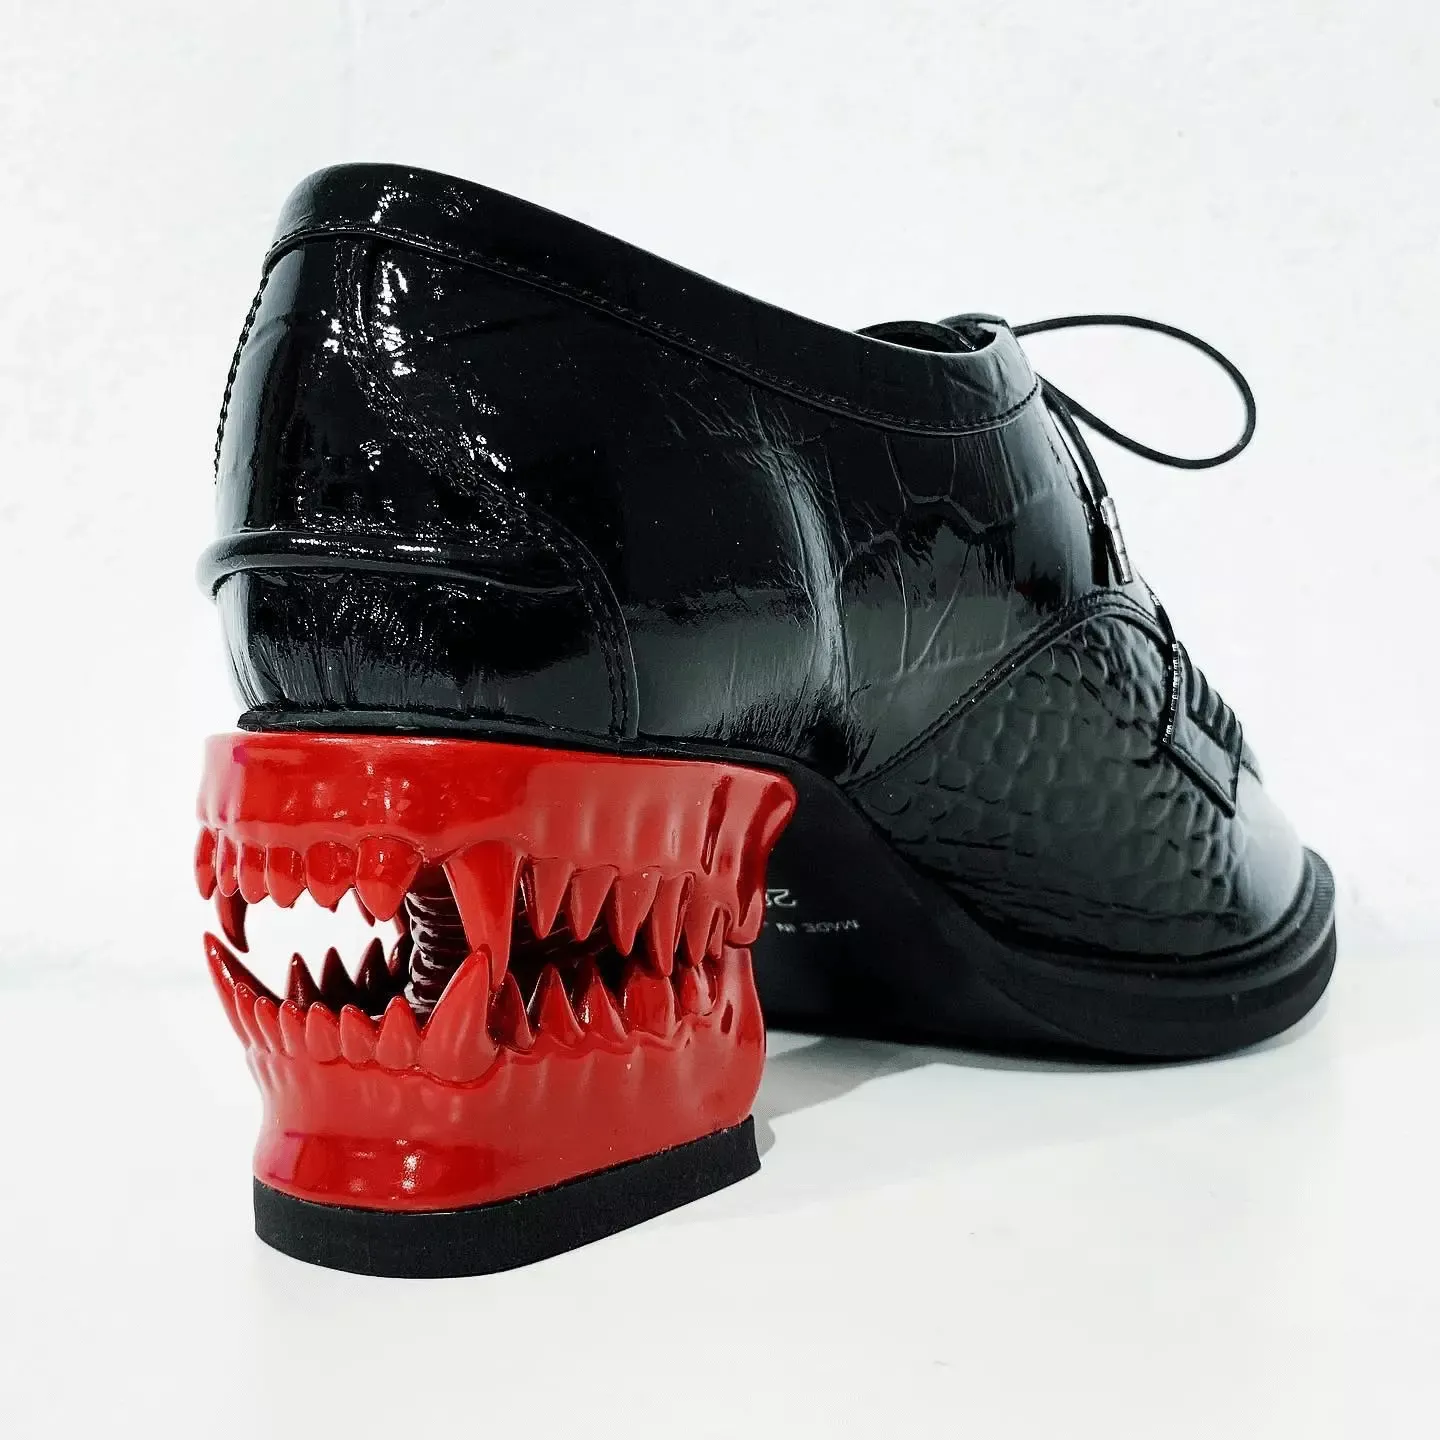 Upgrade your fashion with these fang leather shoes!